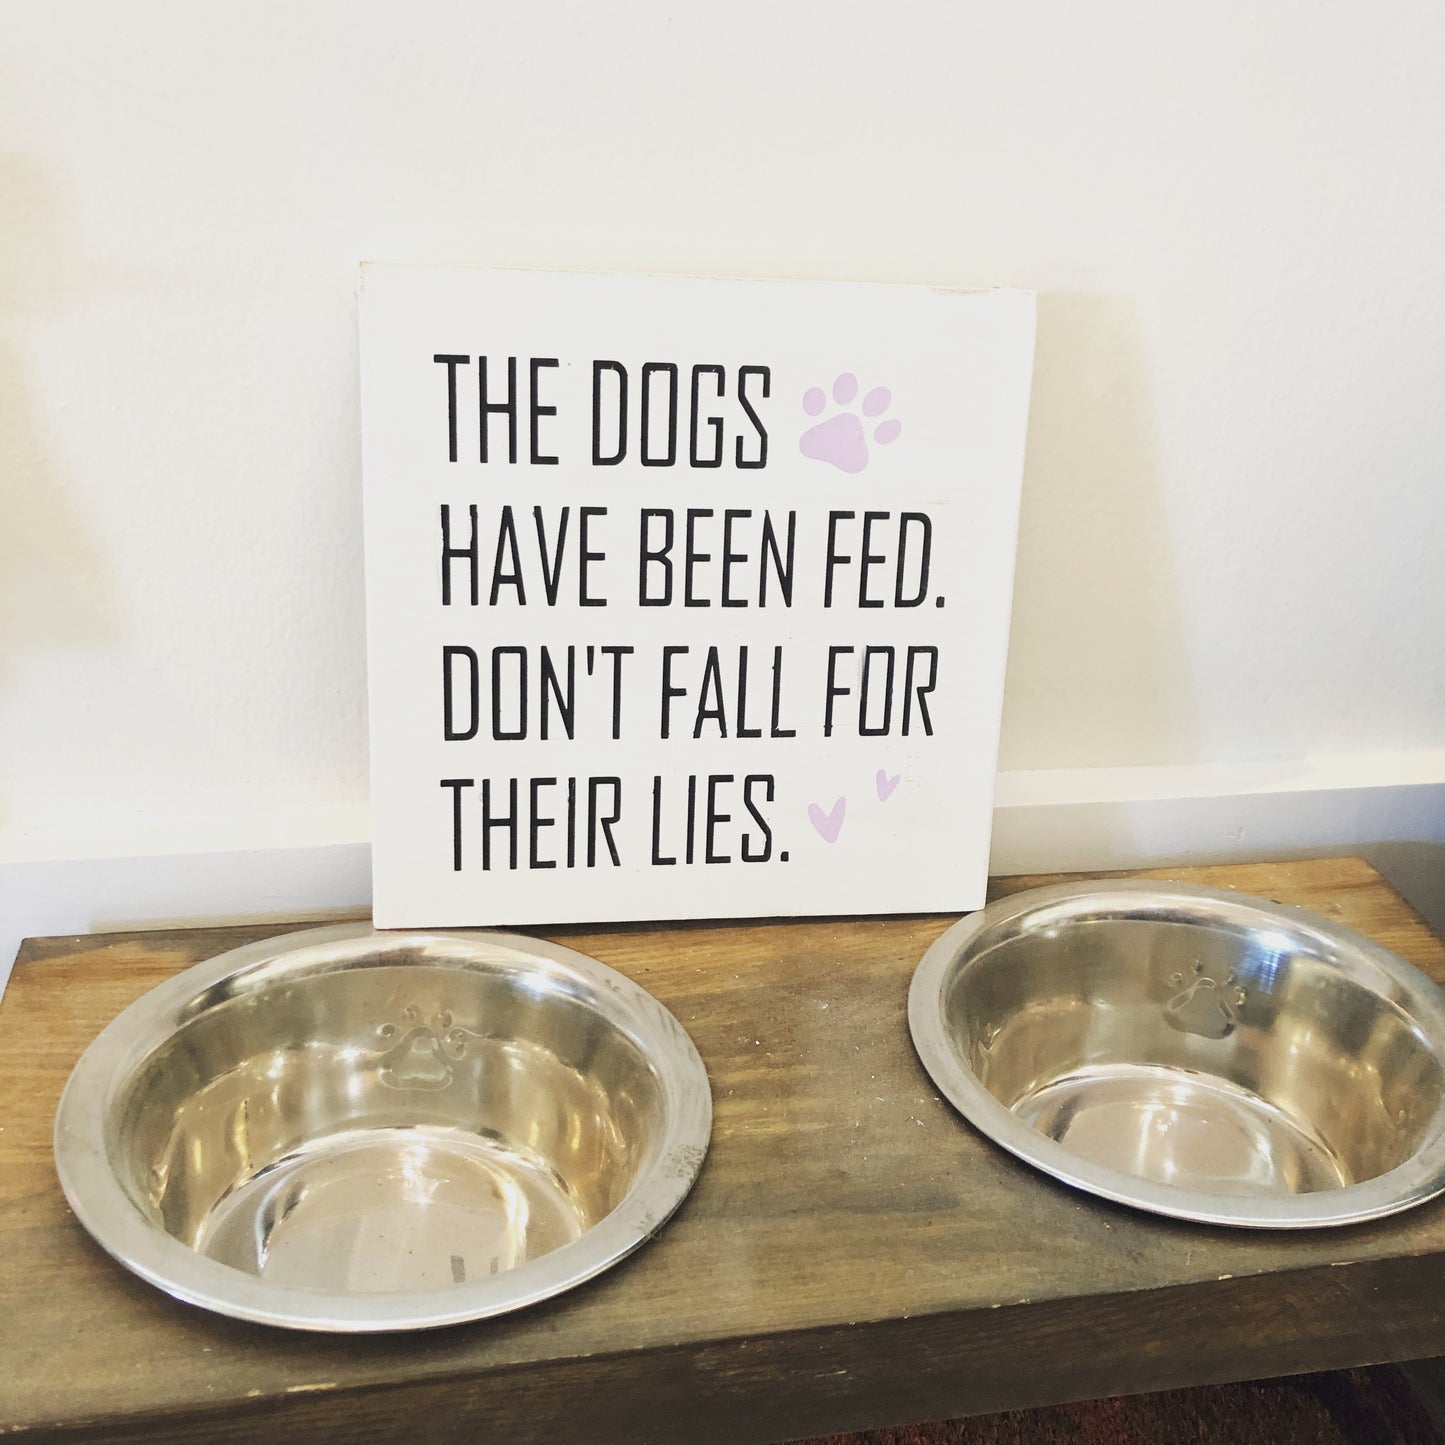 The dogs have been fed. Don't fall for their lies.